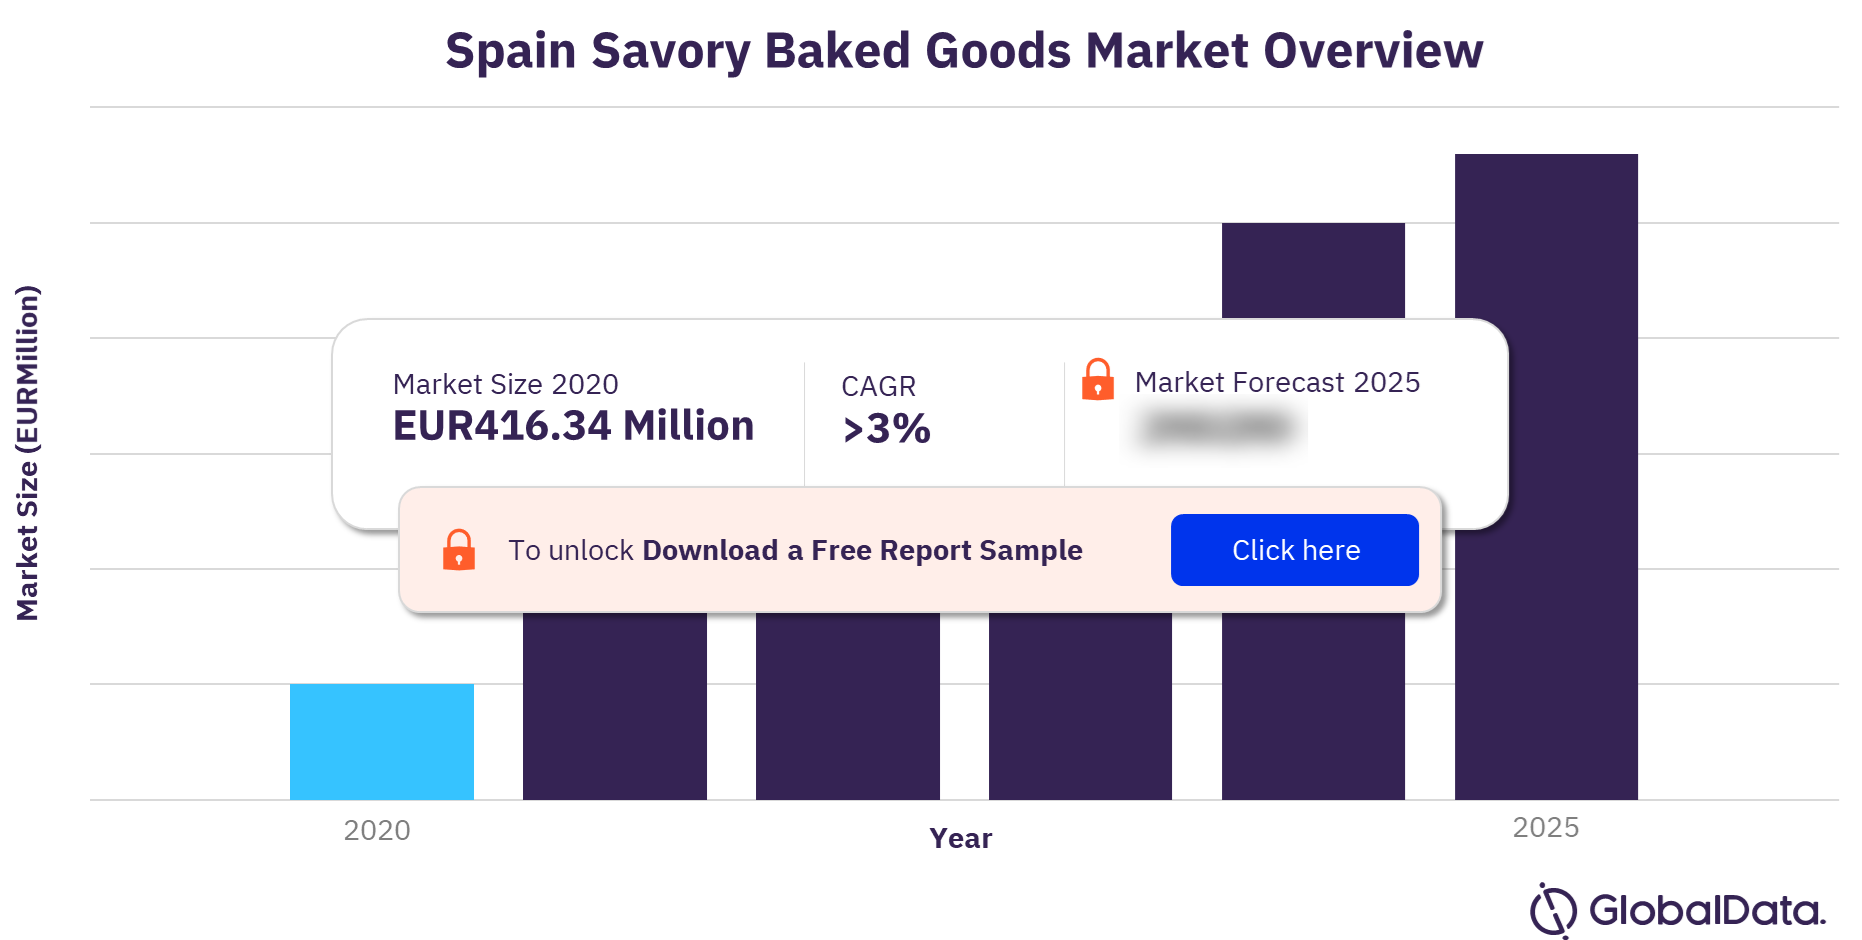 Spain savory baked goods market overview 